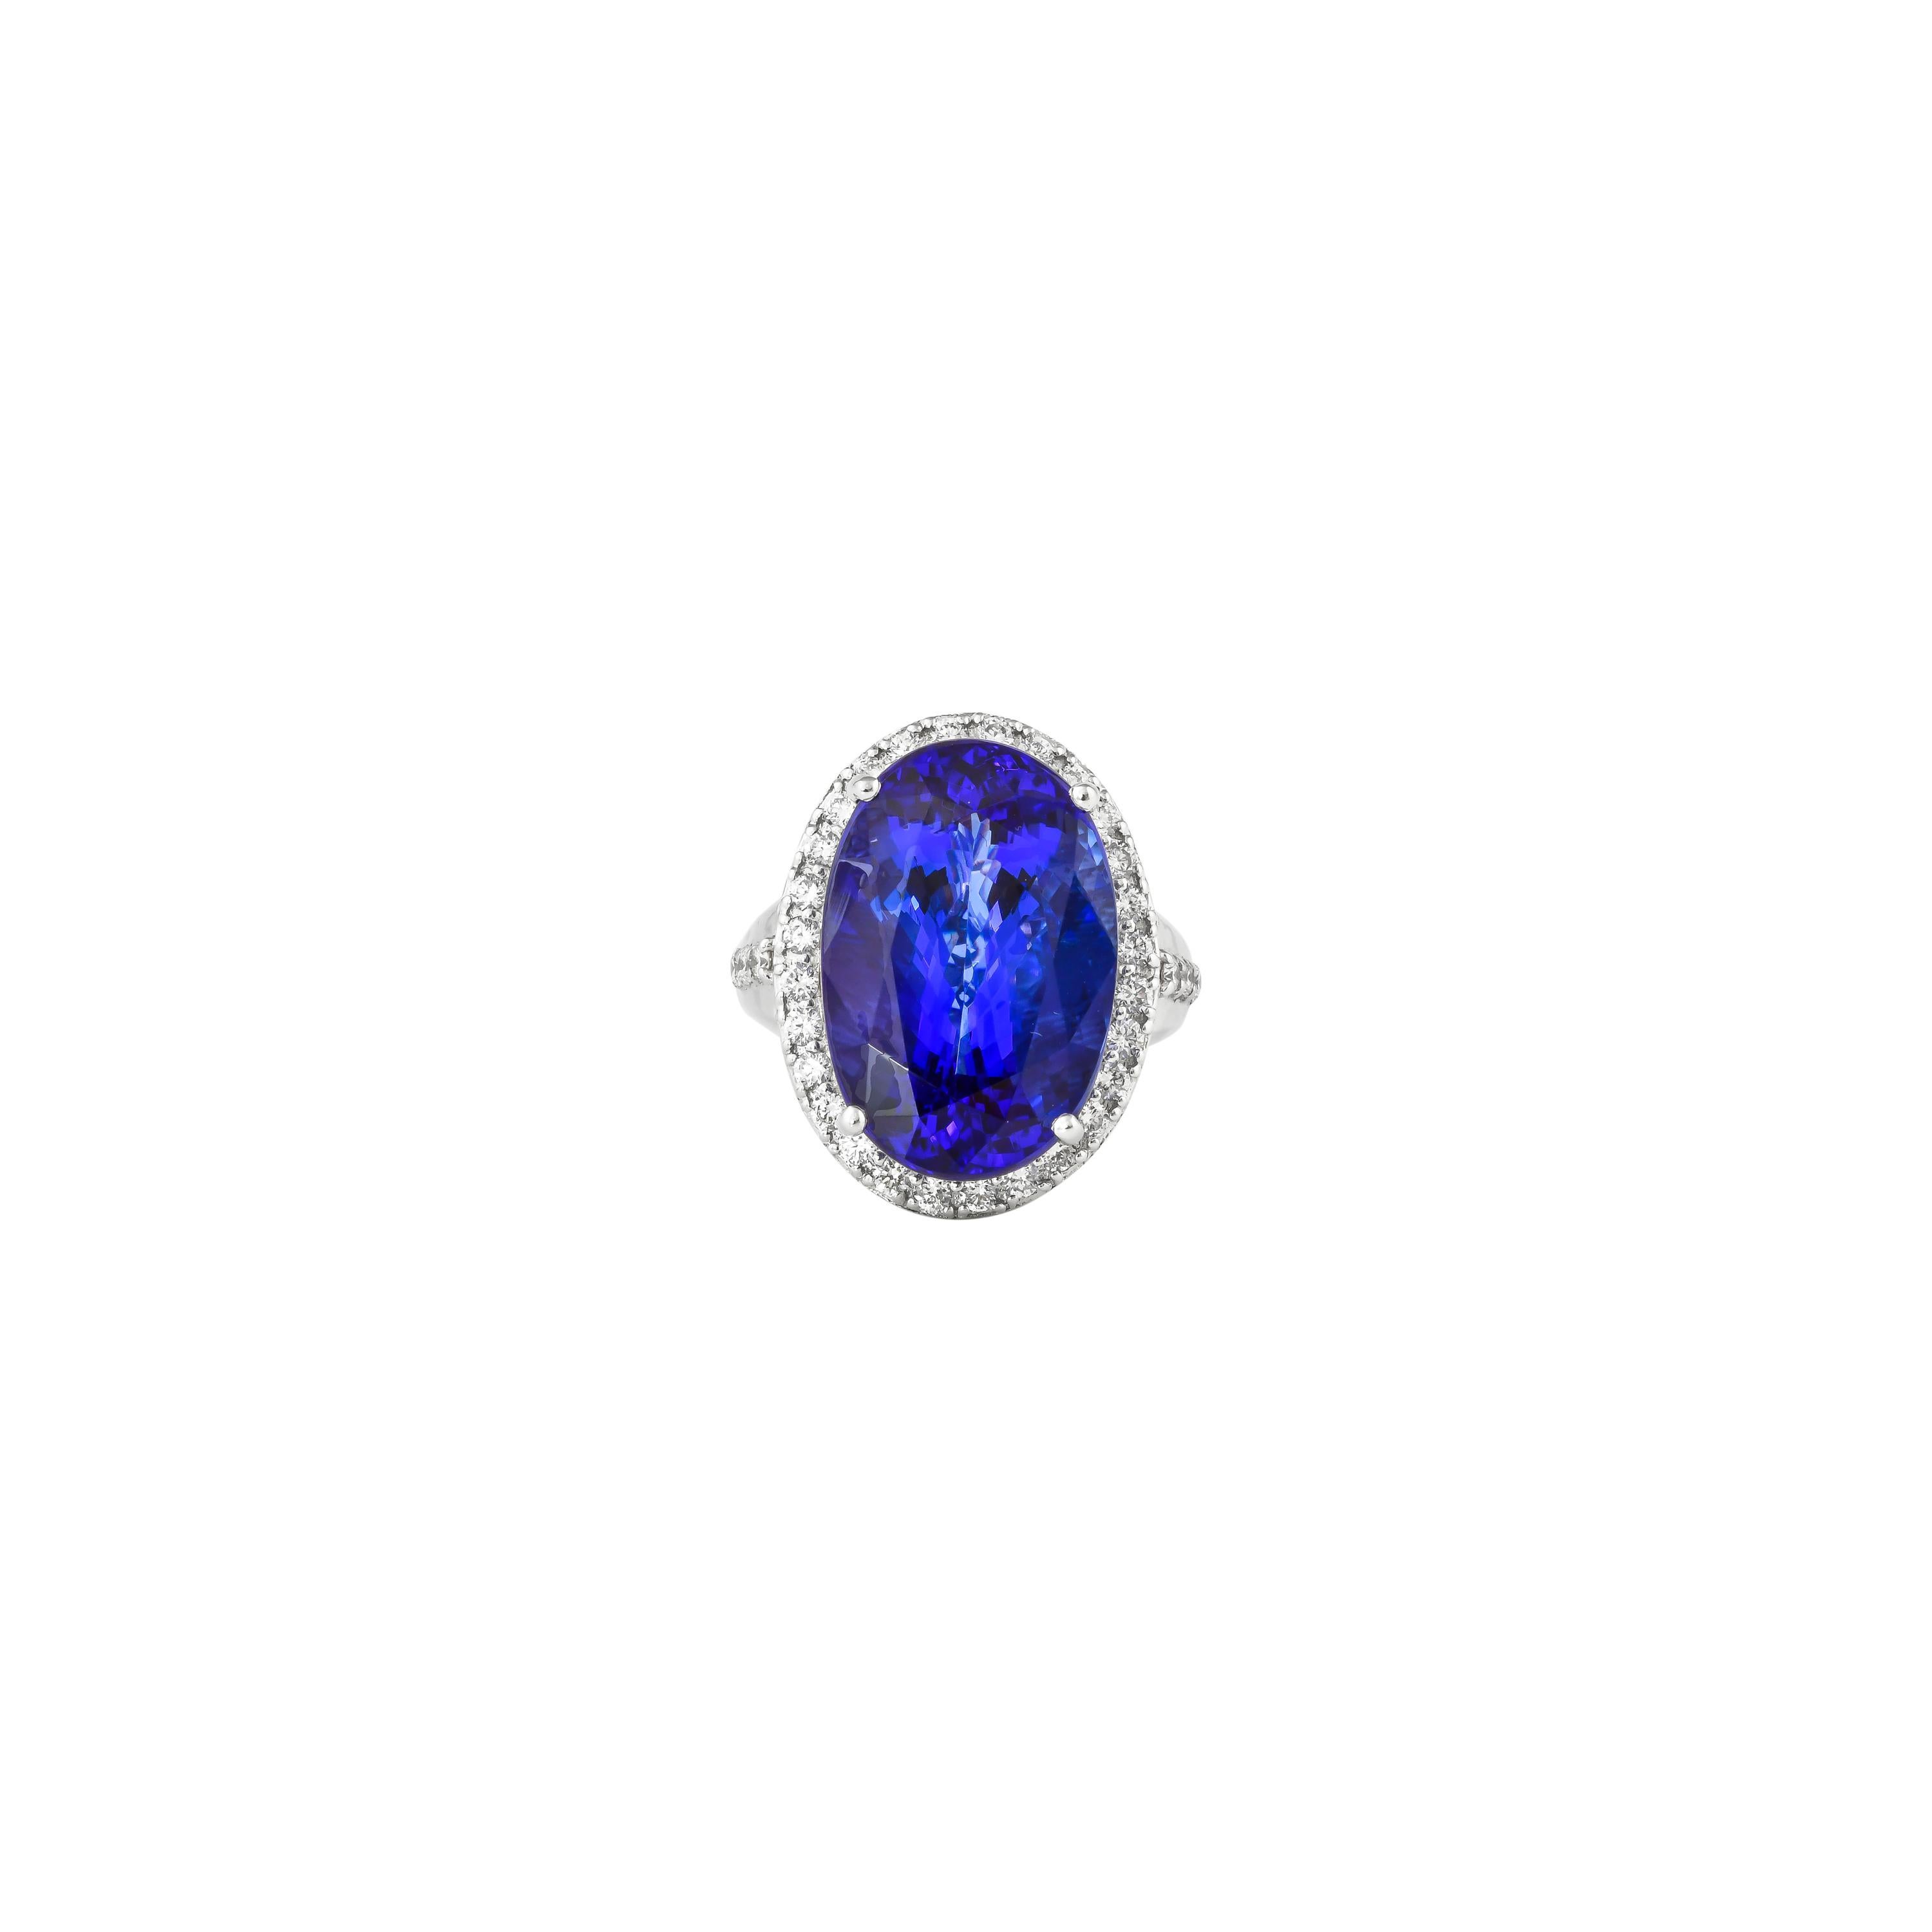 Oval Cut 20.3 Carat Tanzanite and White Diamond Ring in 18 Karat White Gold For Sale